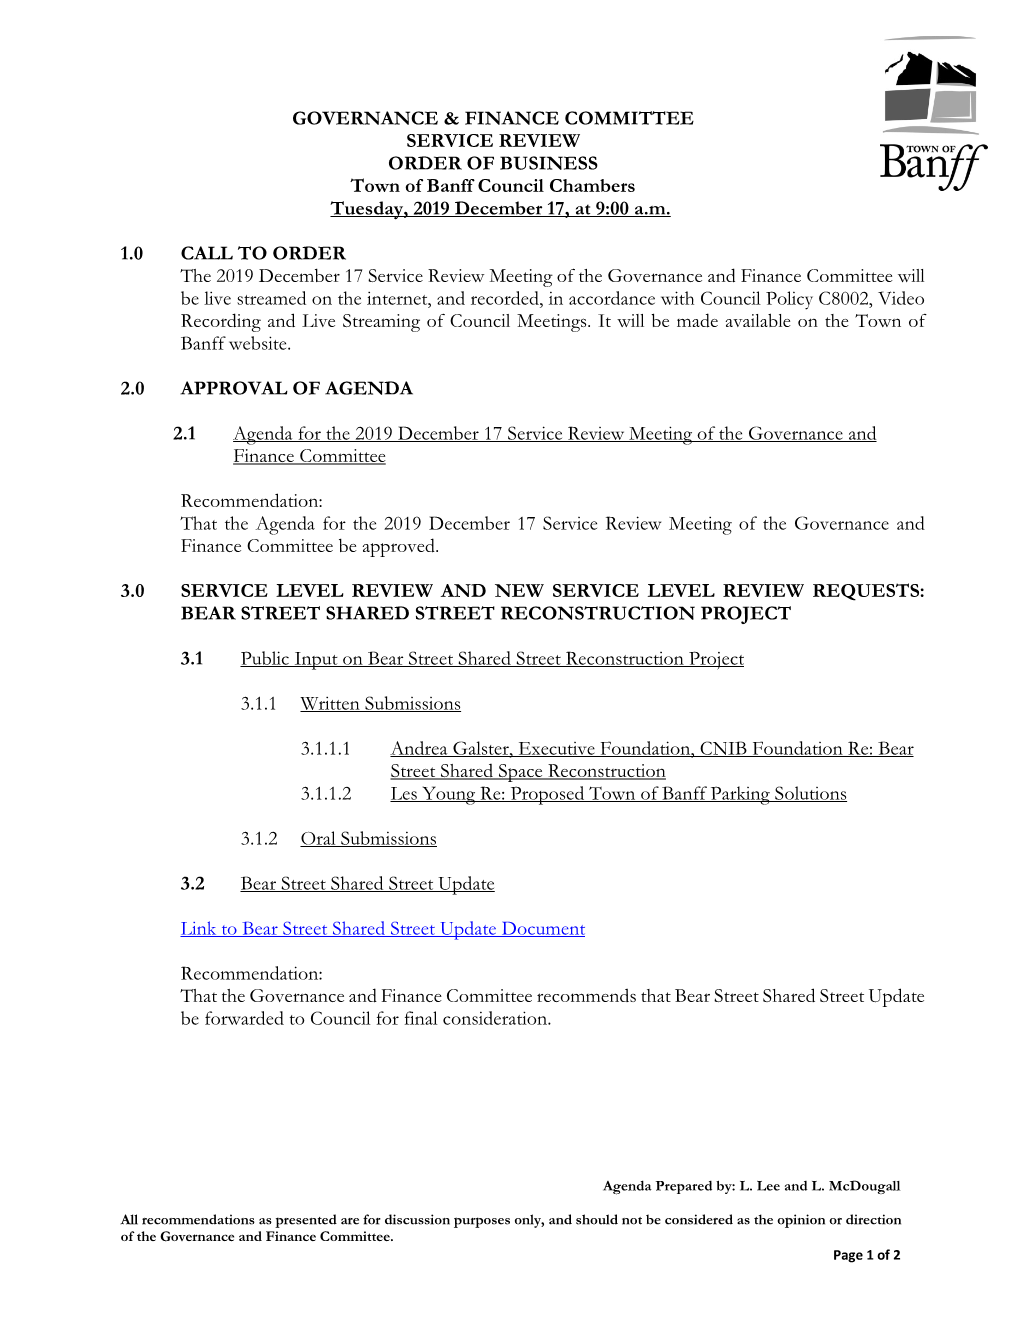 Governance and Finance Committee Service Review Agenda 2019 December 17 Item #: 3.1.1.1